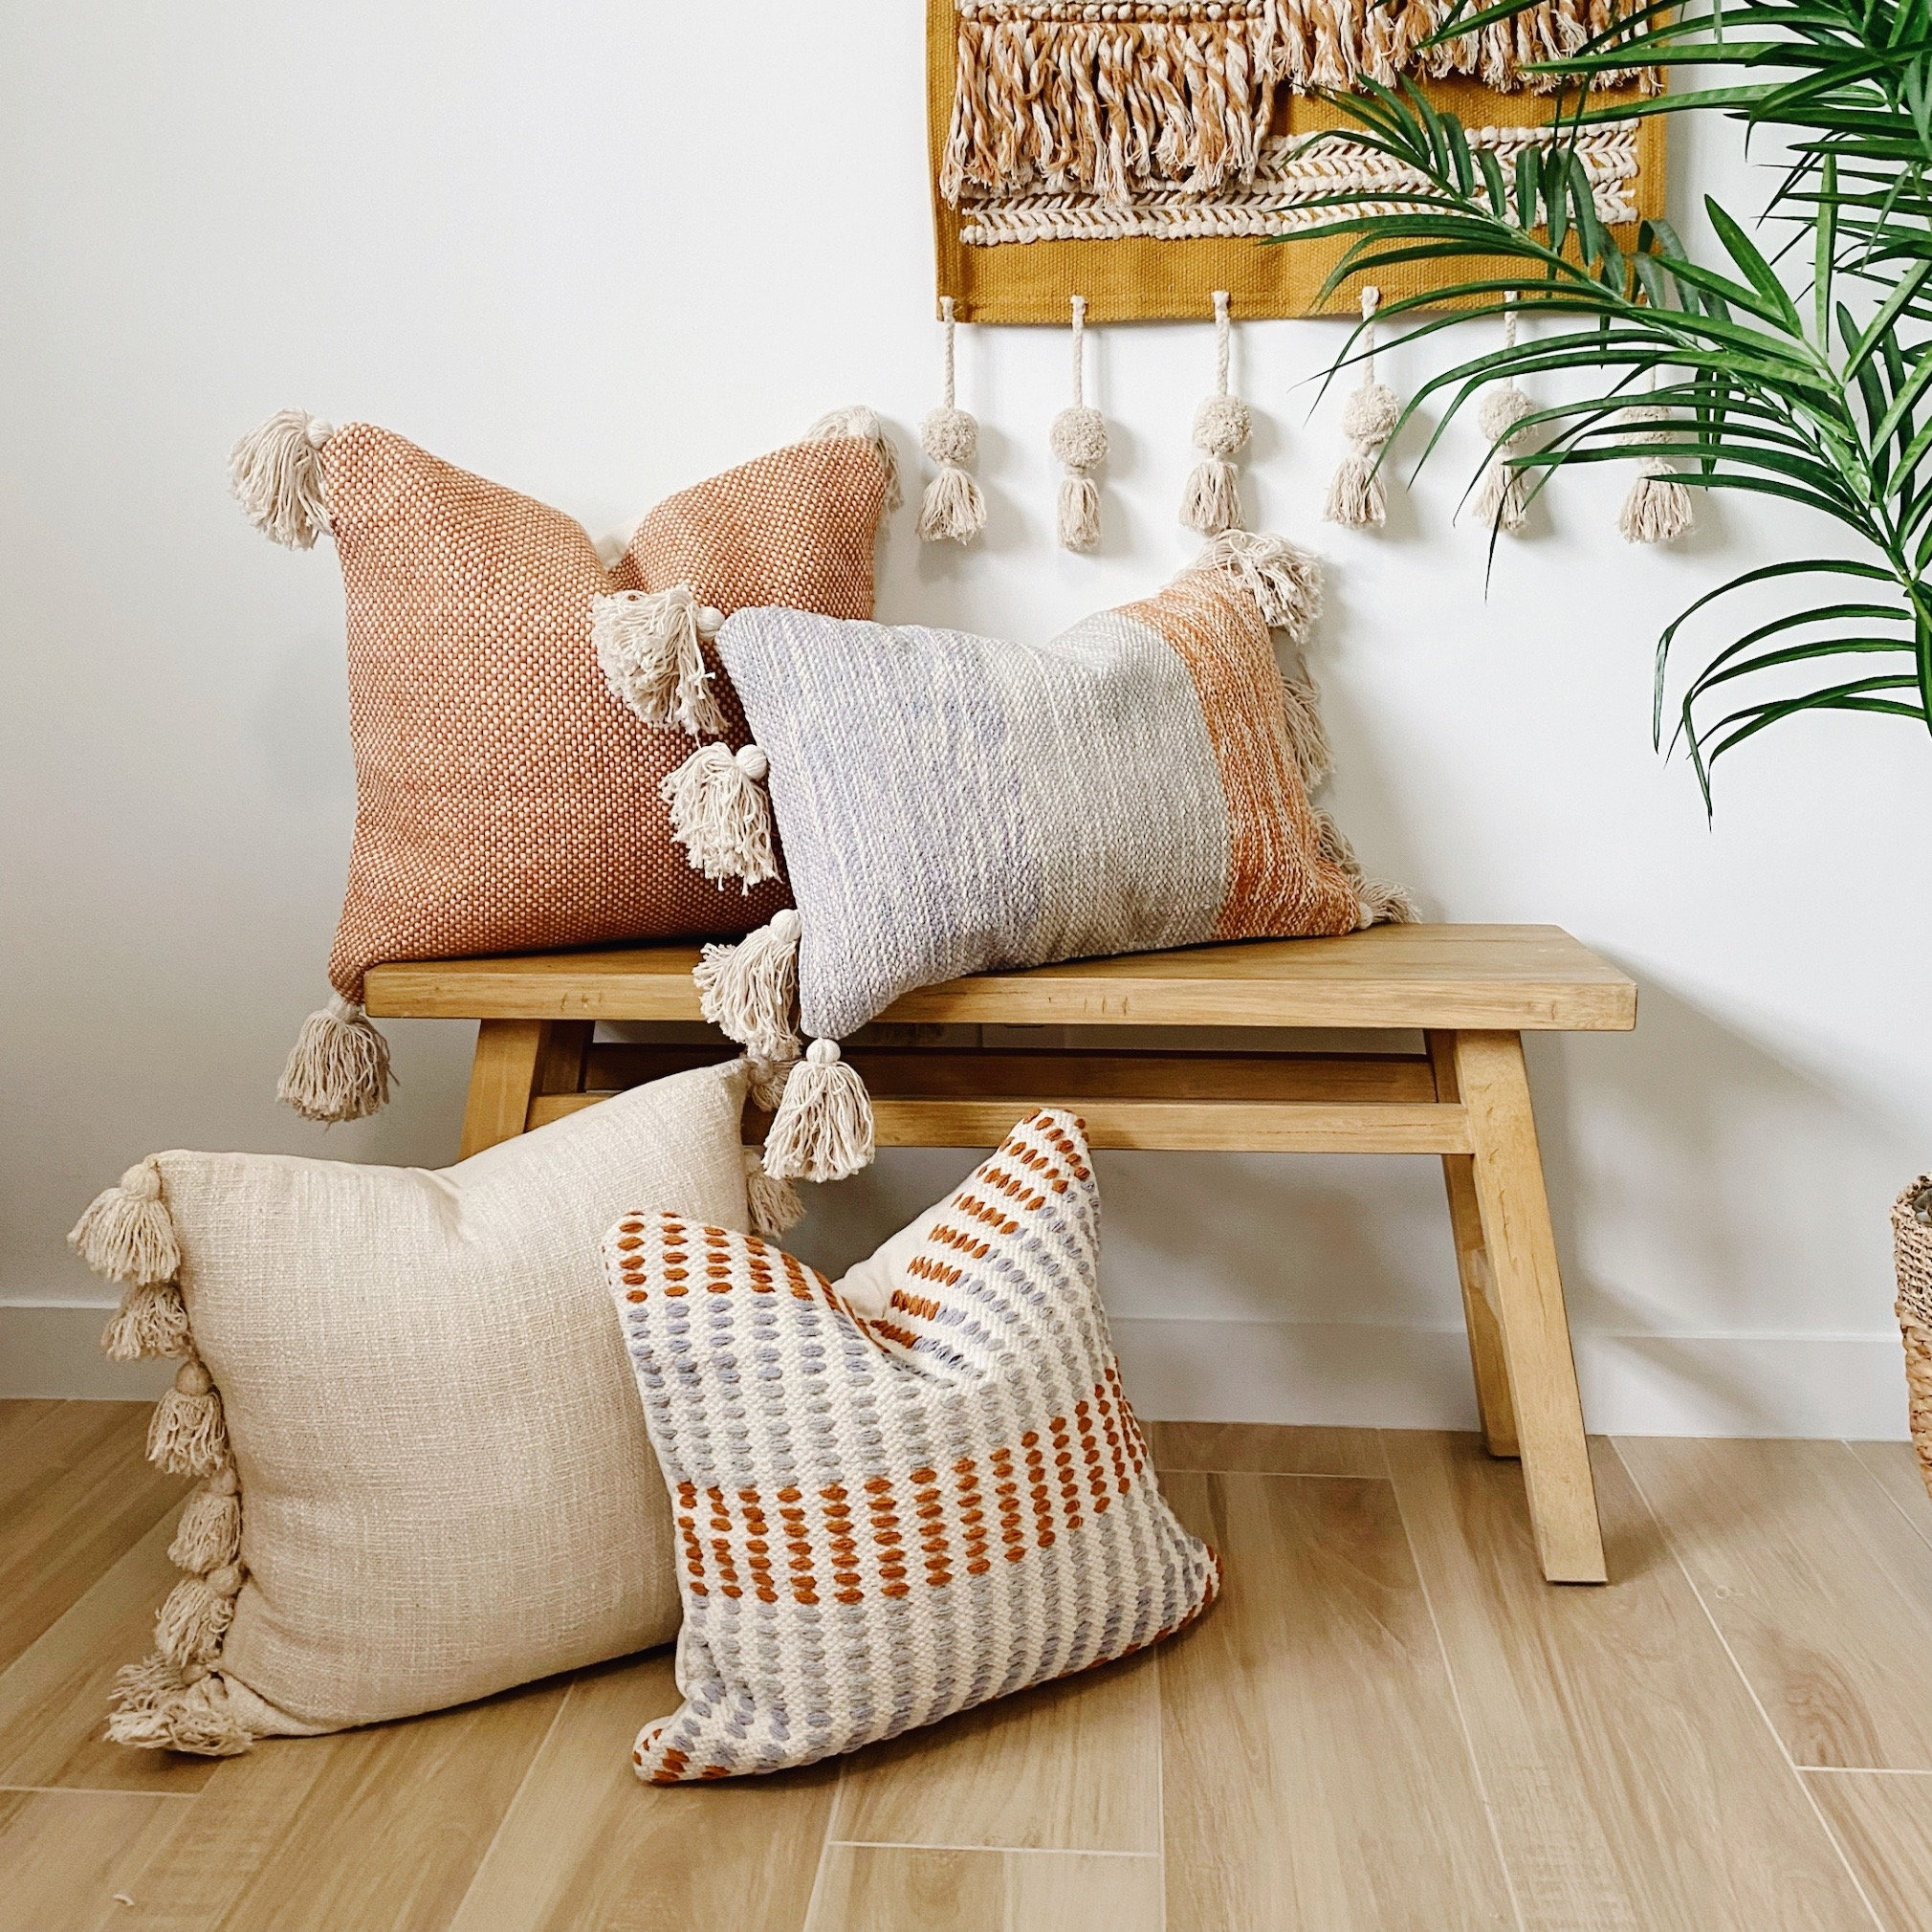 Cozy Throw Pillow & Blanket Combos We Love from Our Fall Collection